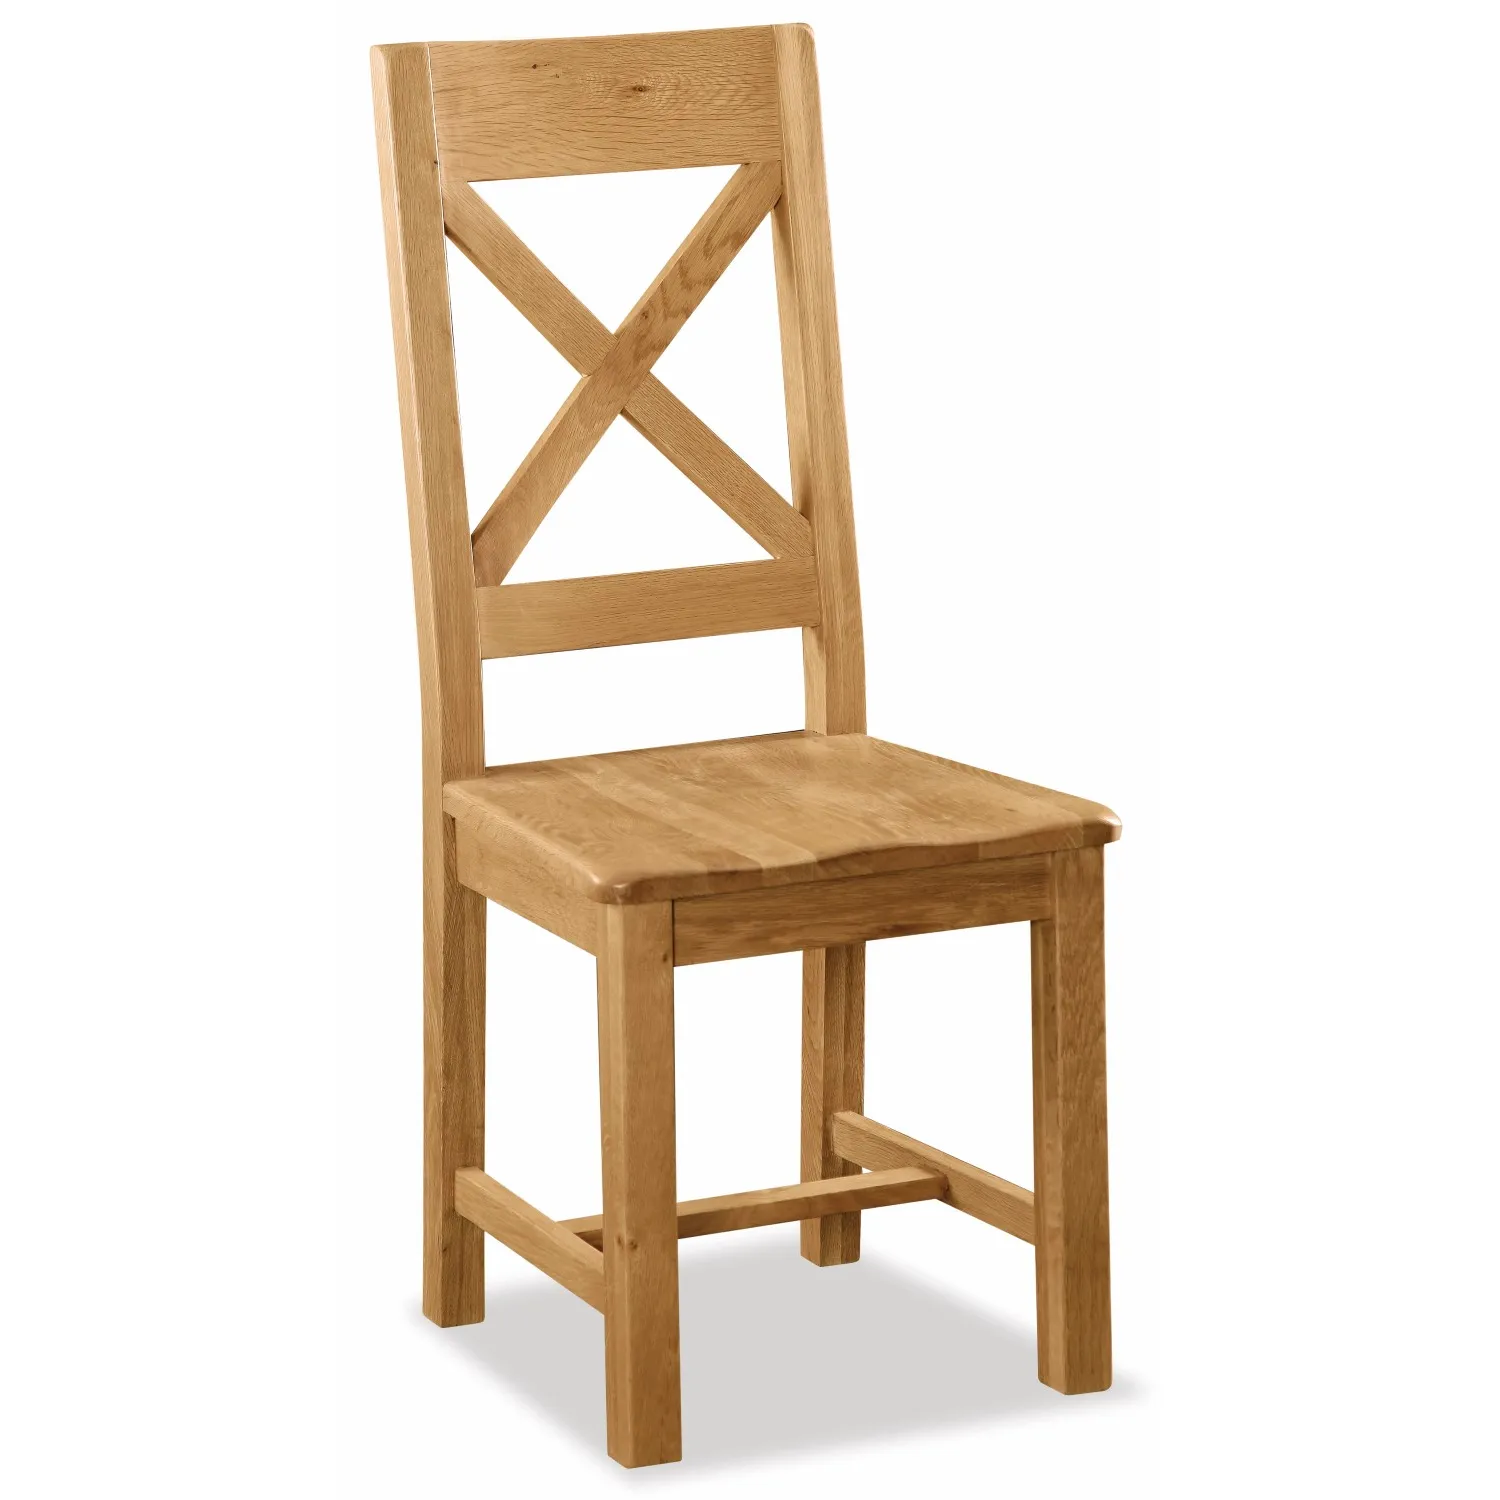 Rustic Solid Oak Cross Back Dining Chair with Solid Seat